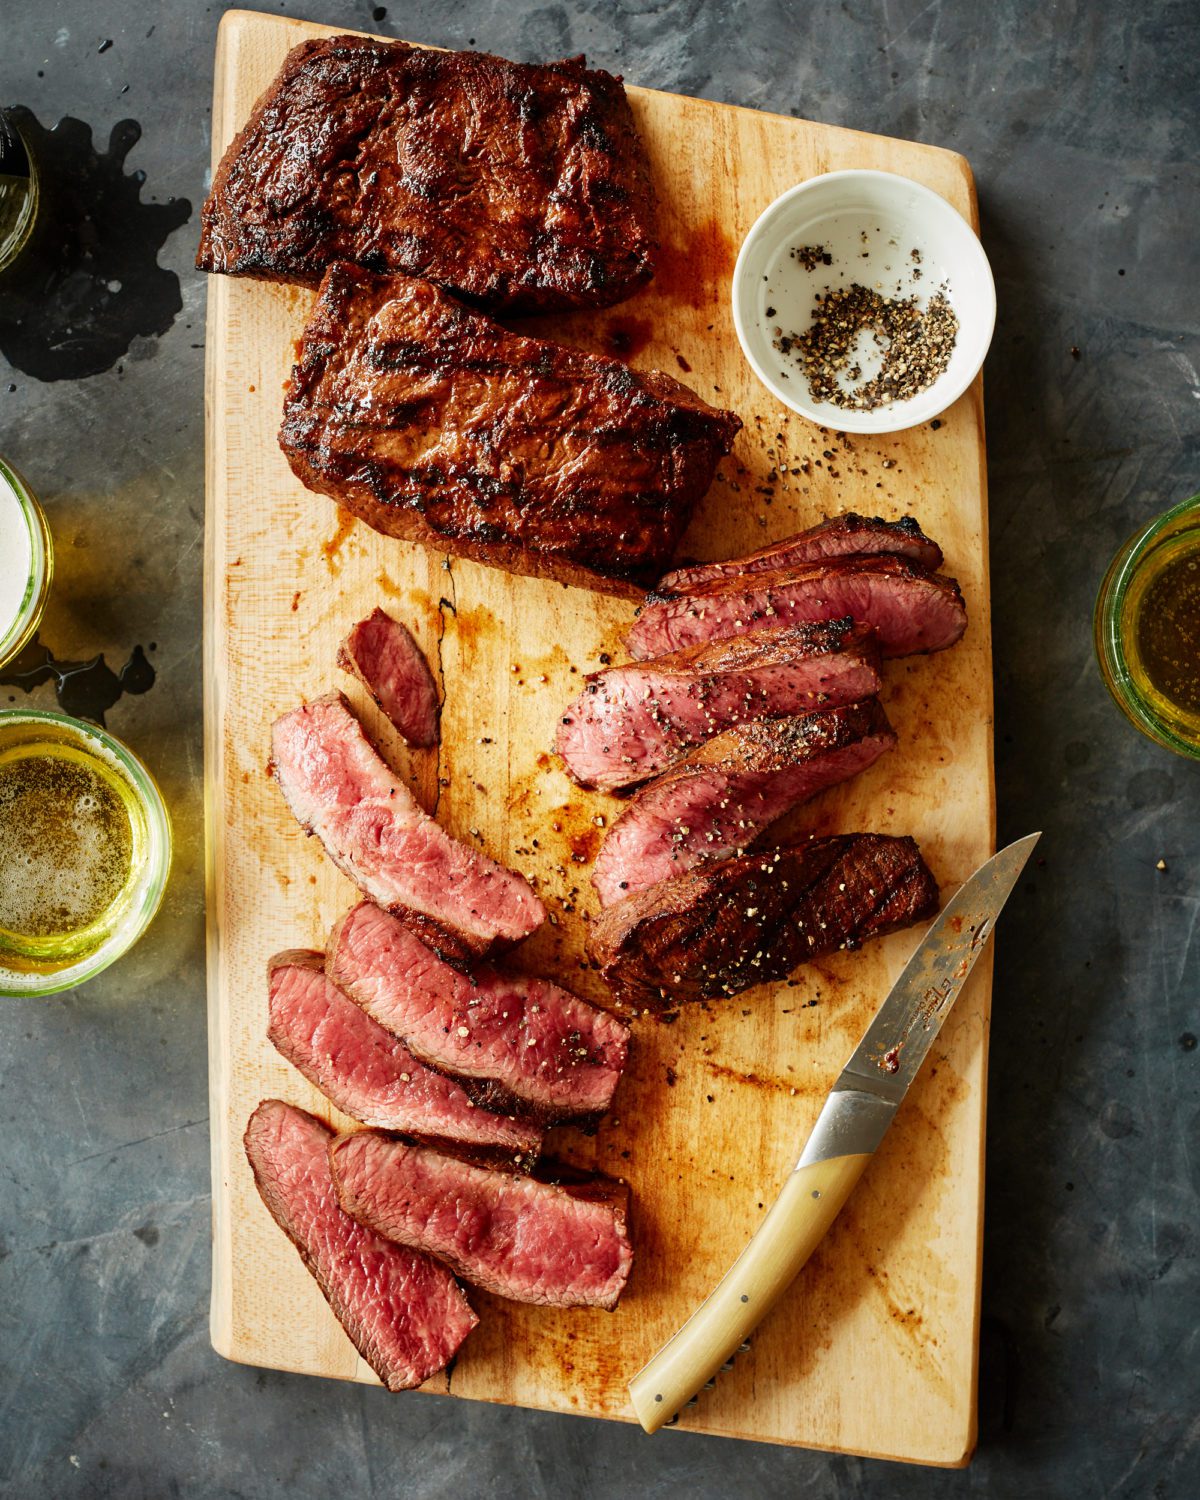 Steak Essentials: Awesome Finishing Sauce